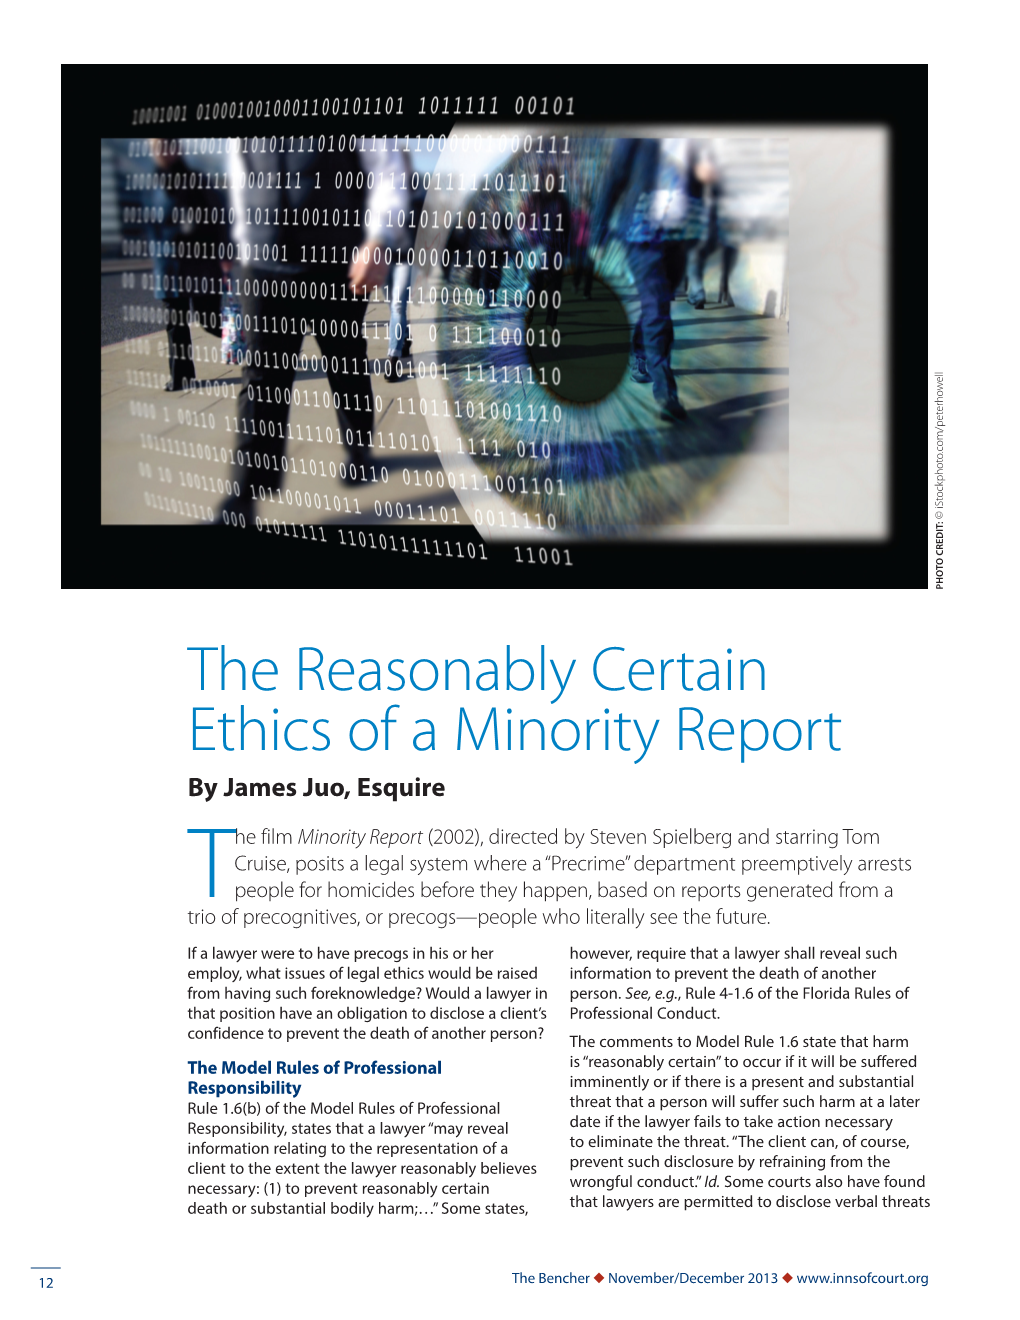 The Reasonably Certain Ethics of a Minority Report by James Juo, Esquire